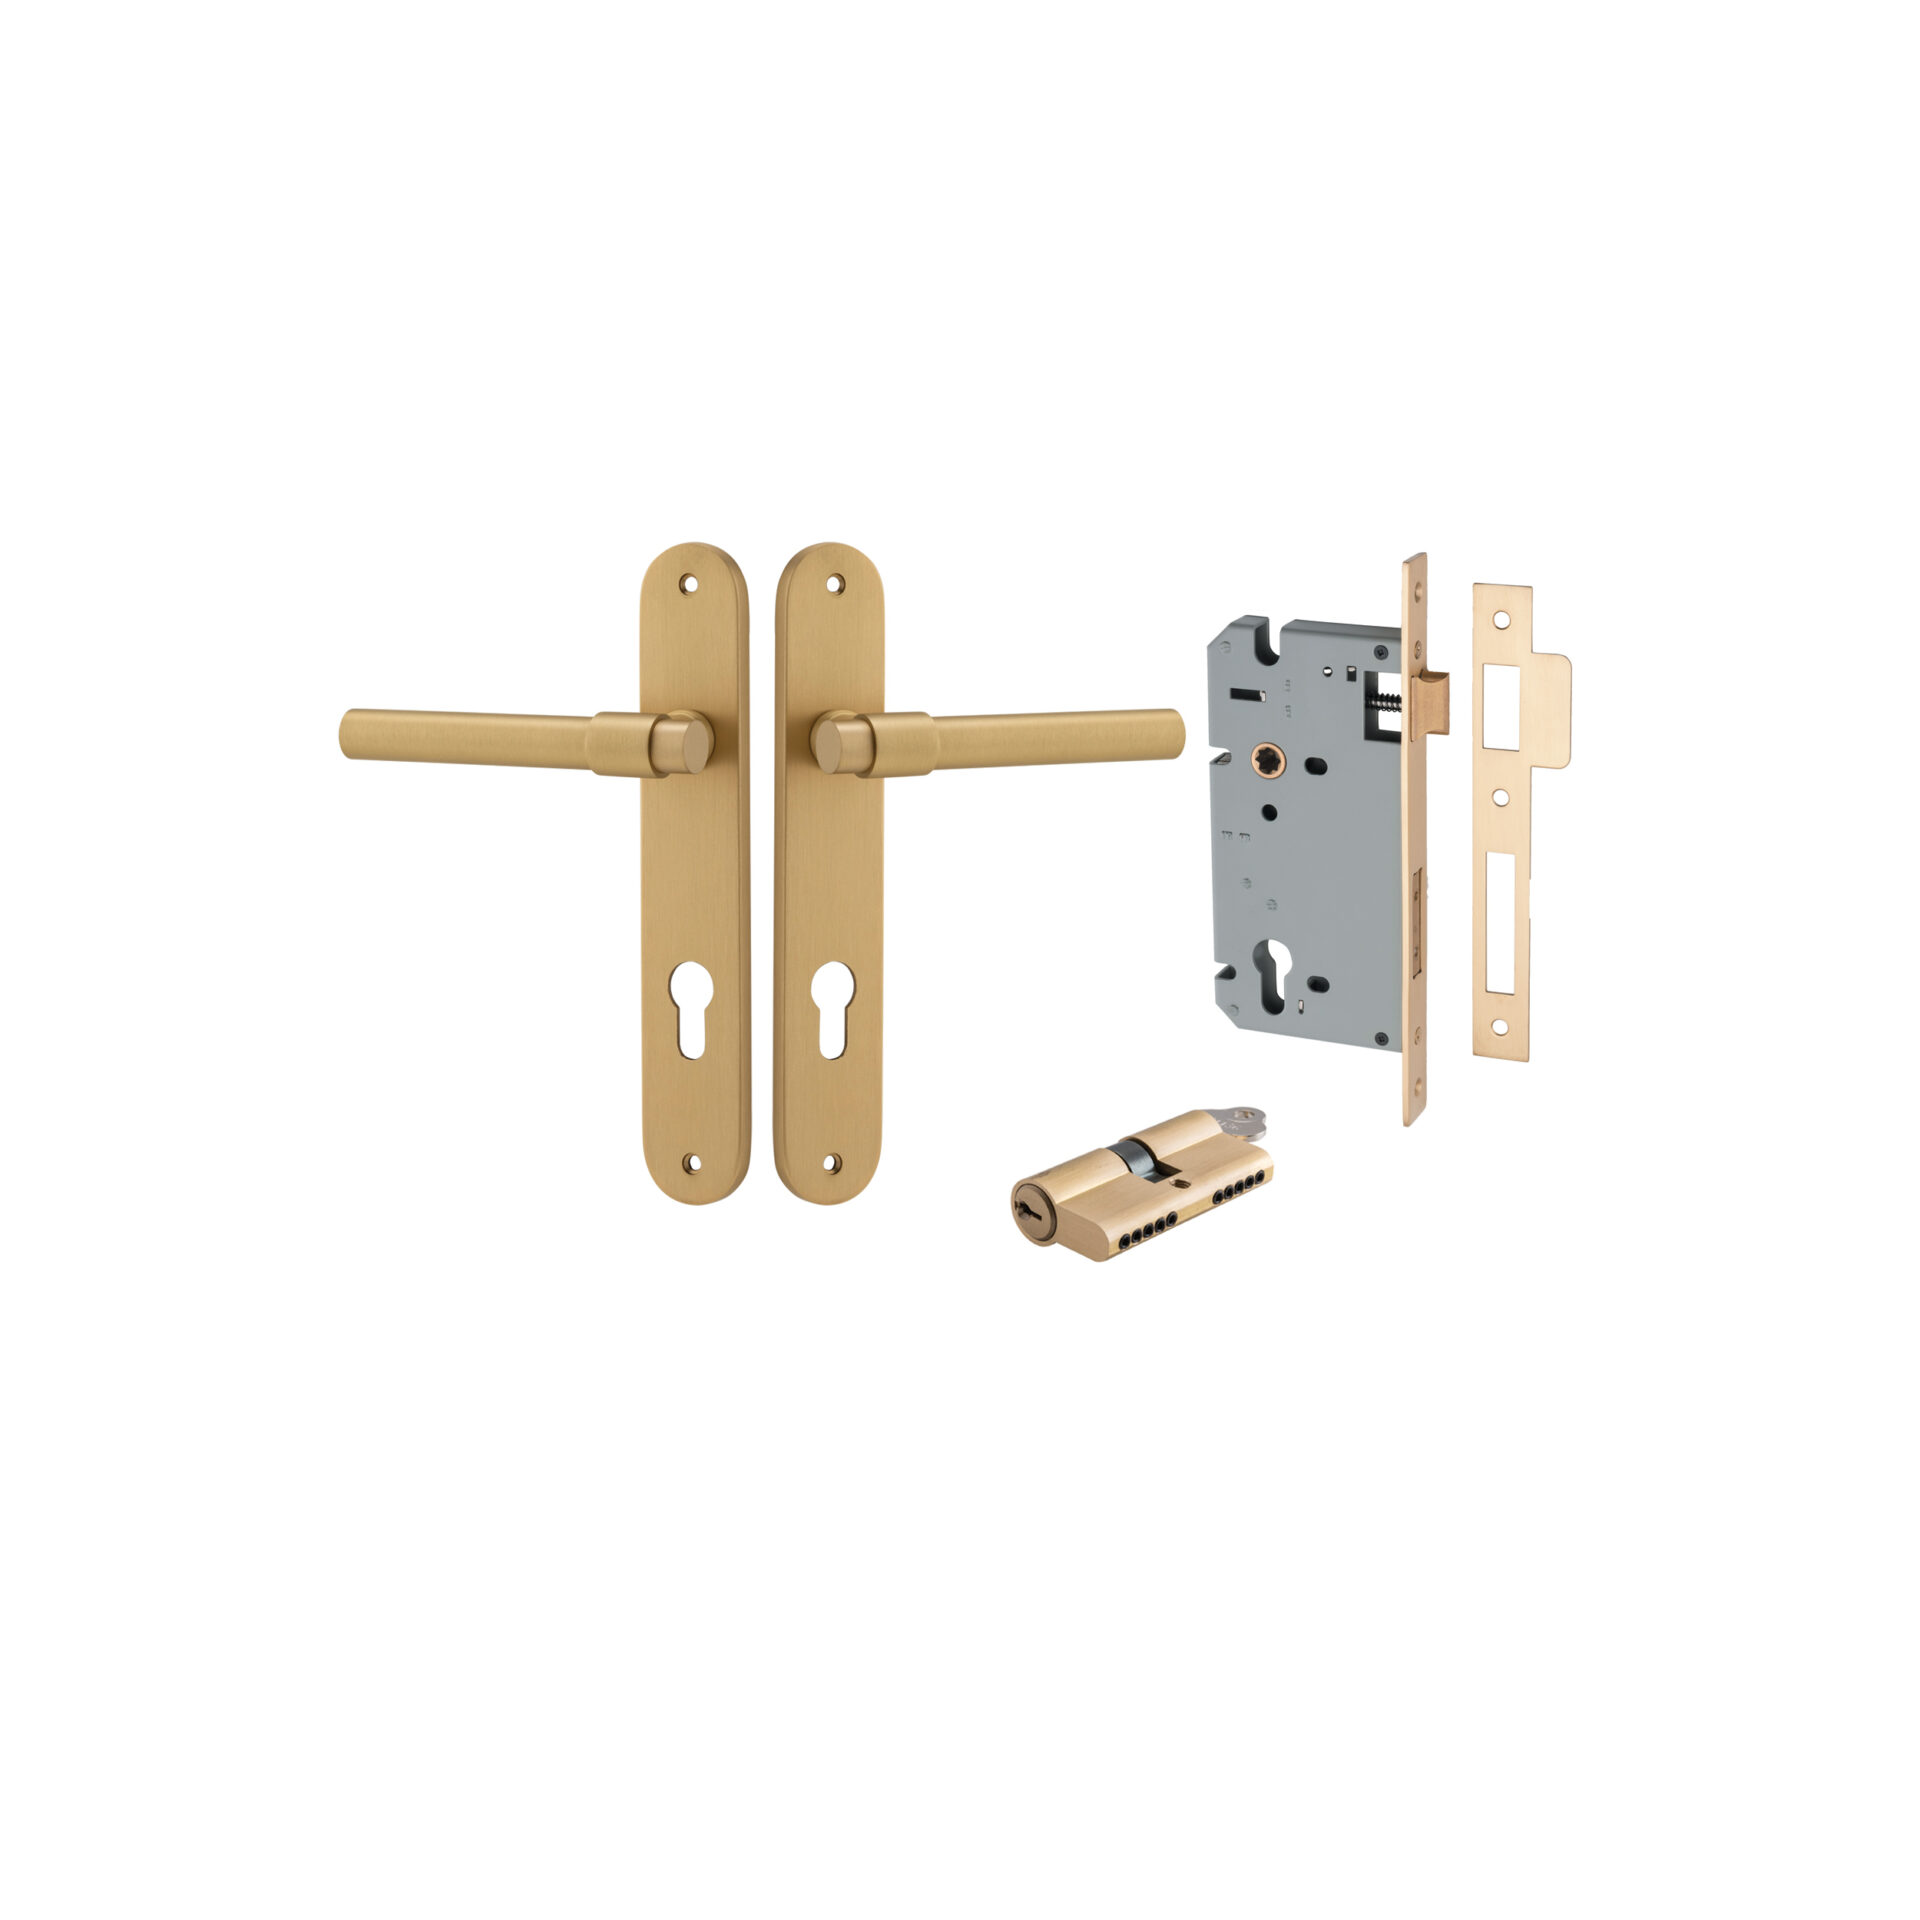 Helsinki Lever - Oval Backplate Entrance Kit with High Security Lock